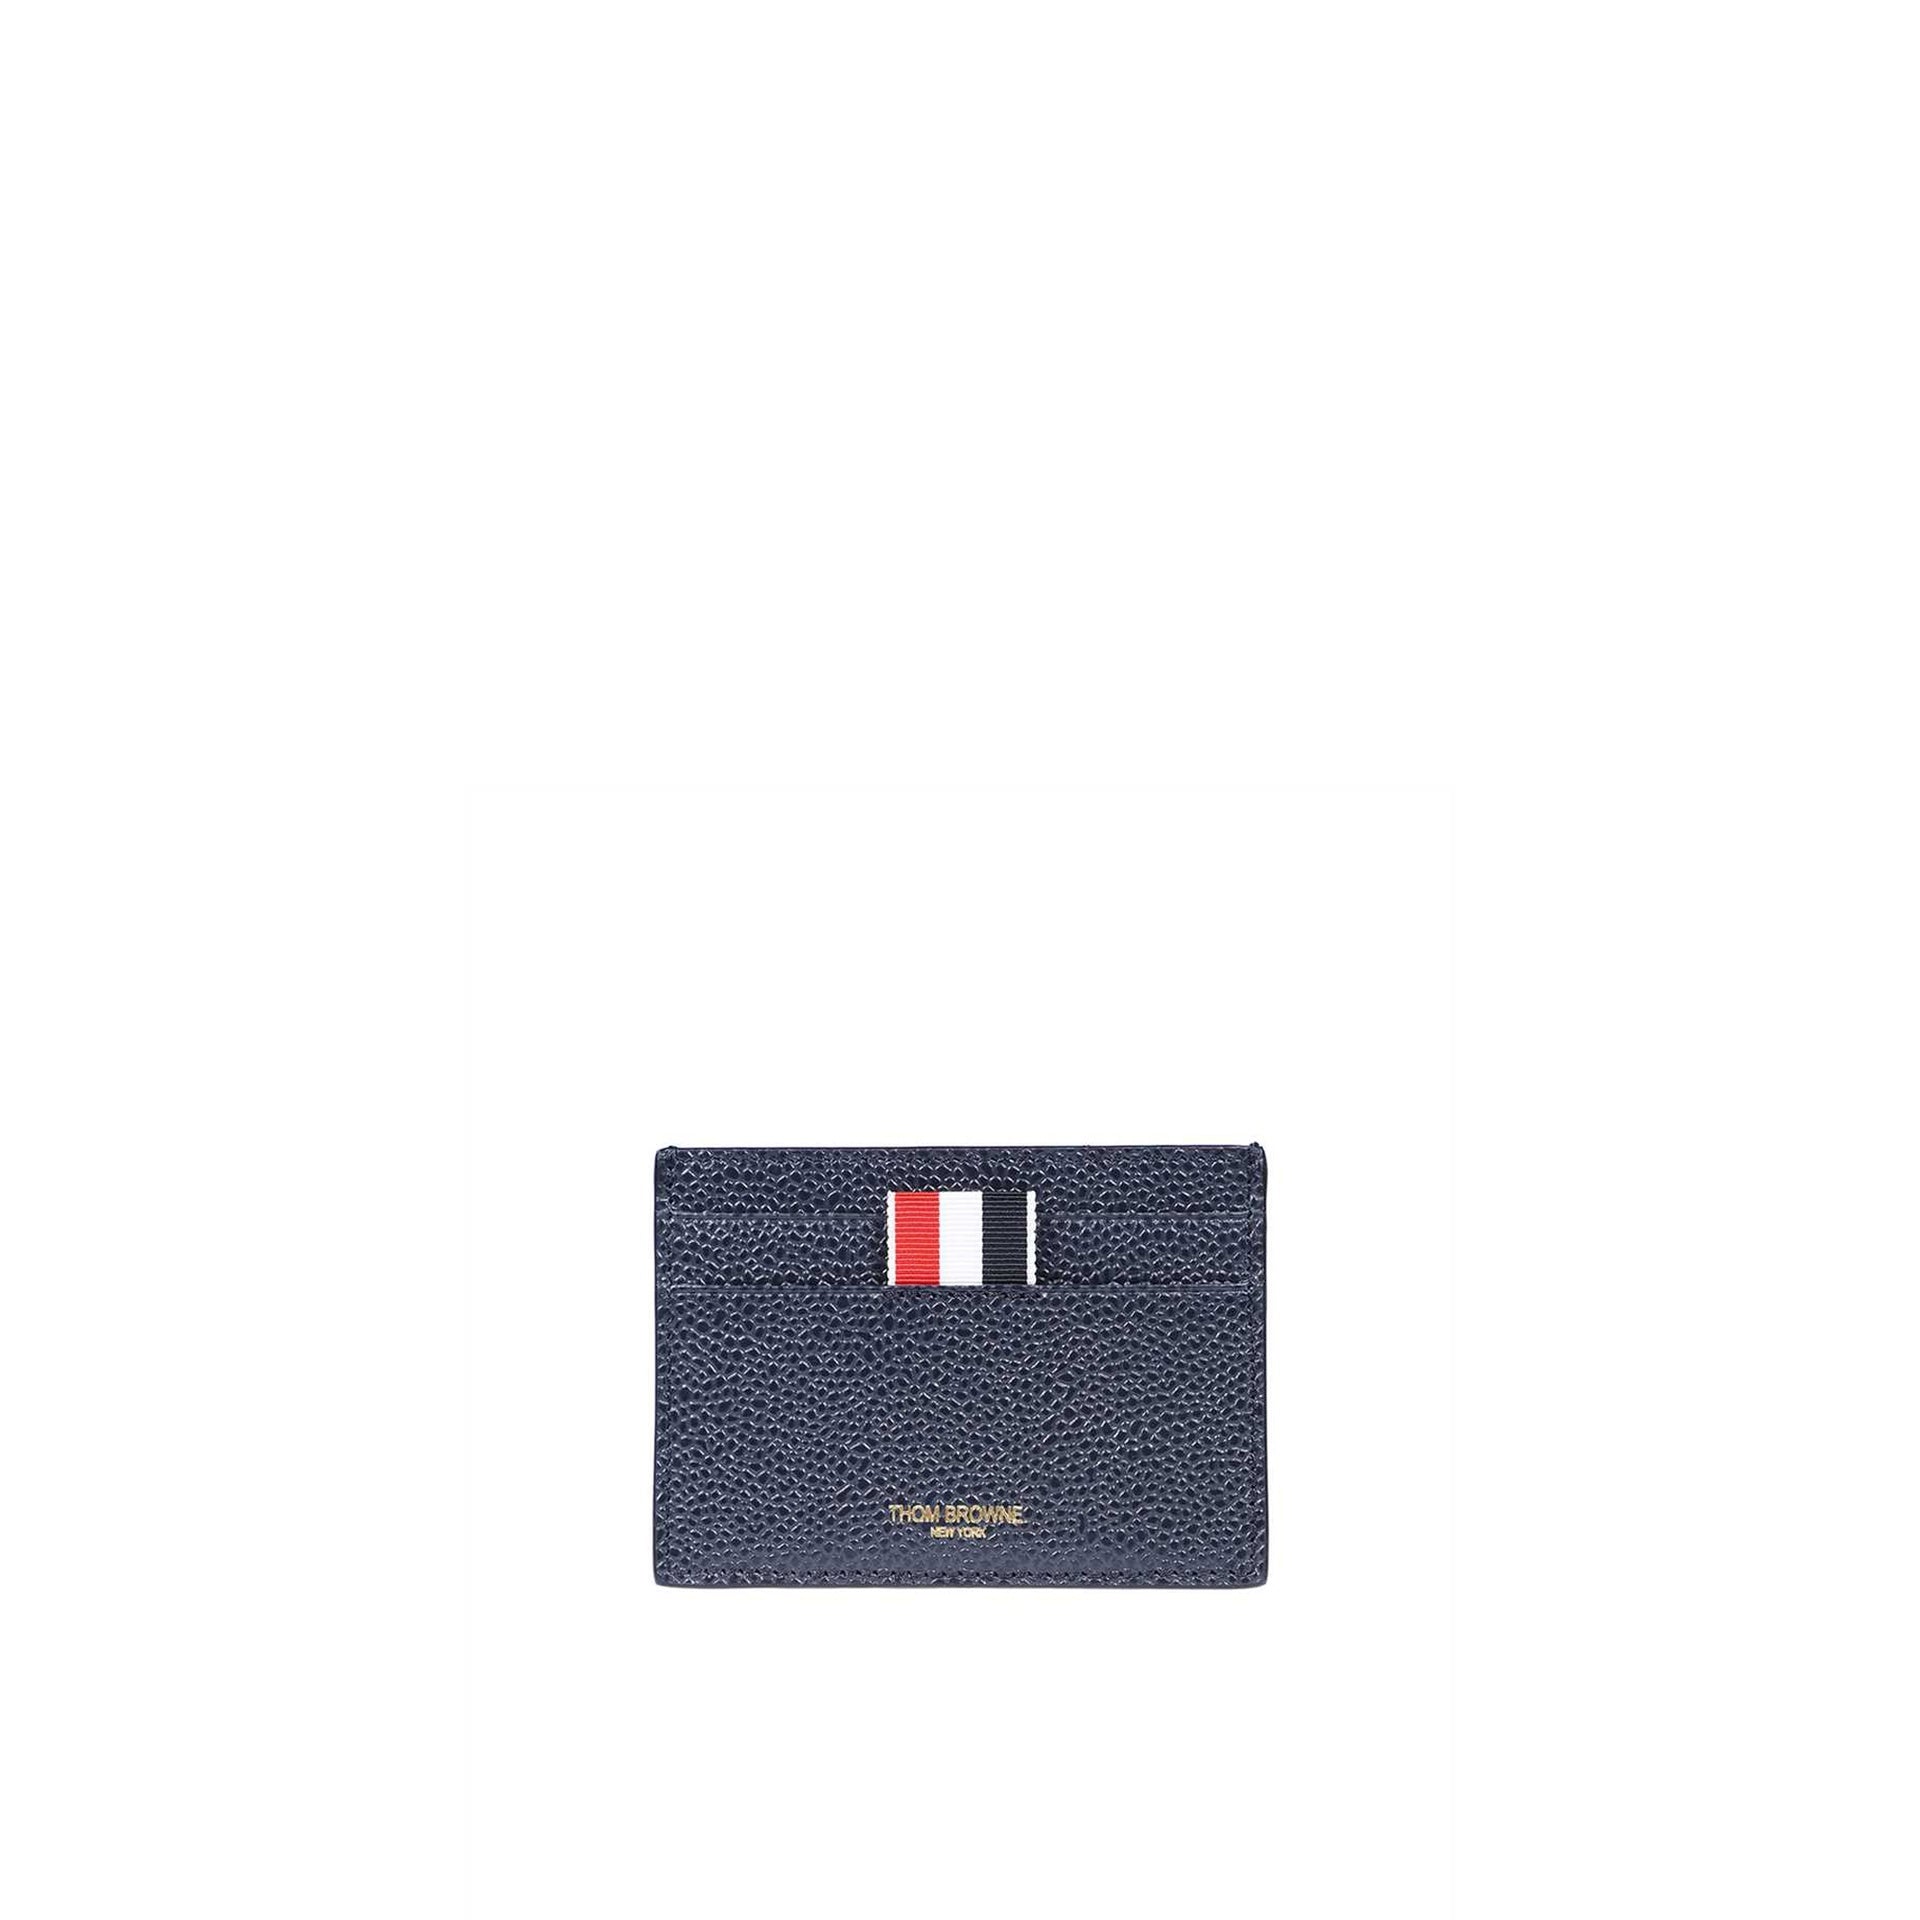 THOM-BROWNE-OUTLET-SALE-Thom-Browne-Leather-Card-Holder-Taschen-BLUE-UNI-ARCHIVE-COLLECTION.jpg